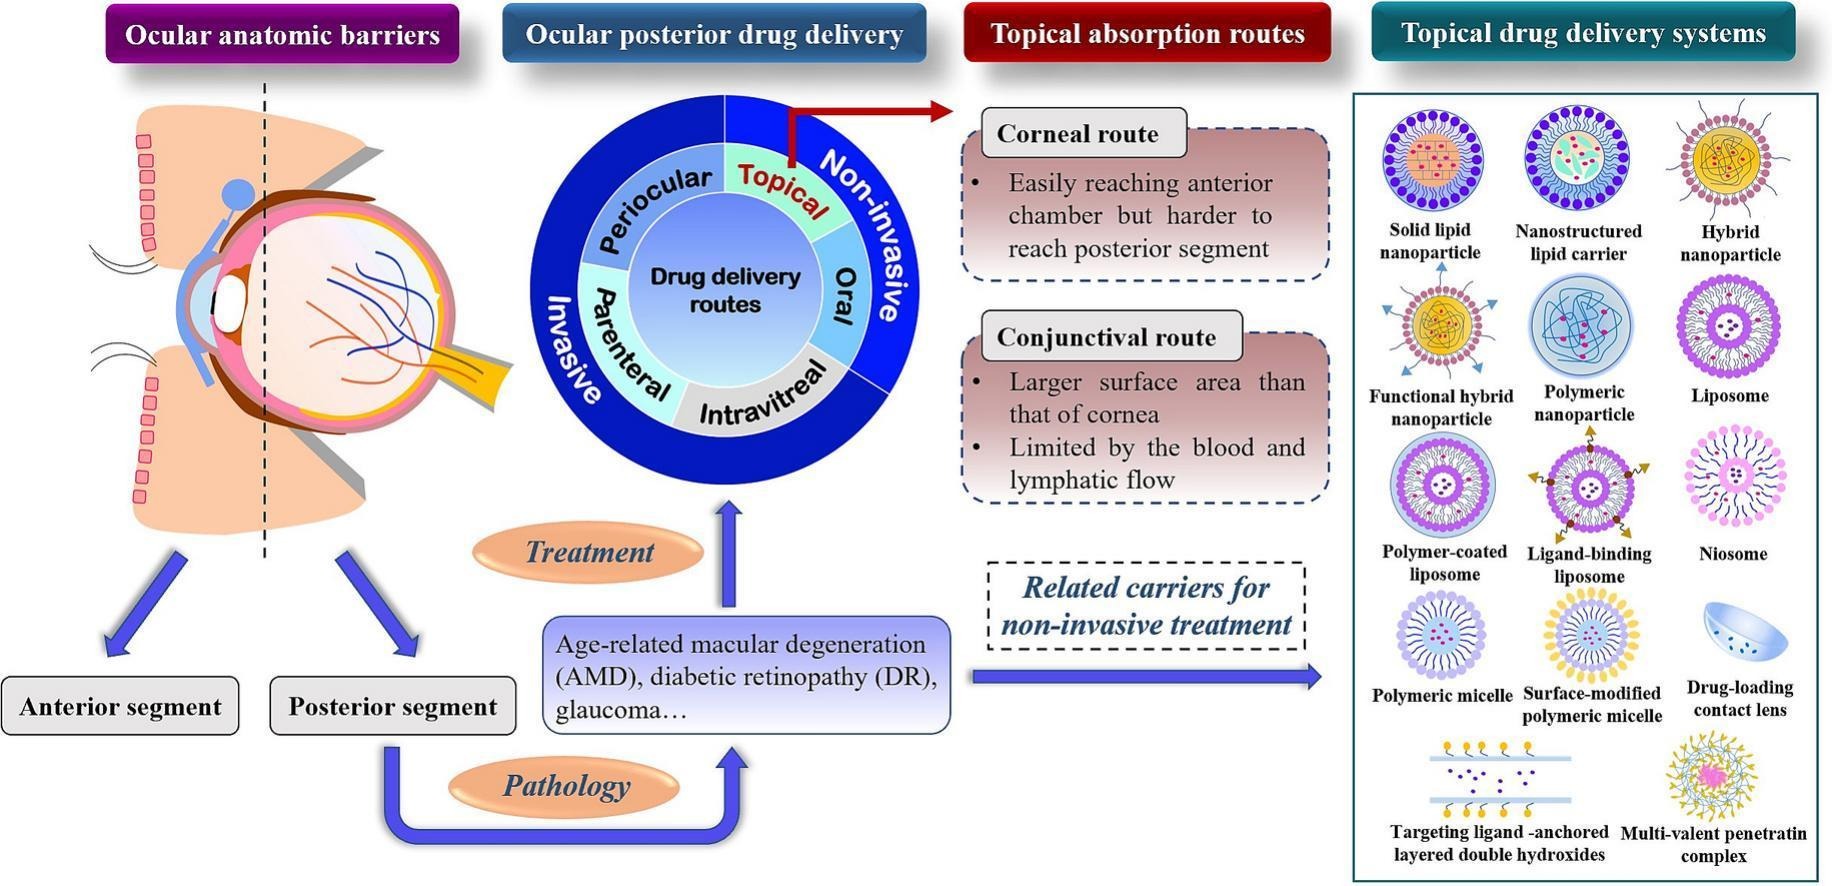 Challenges and strategies for ocular posterior diseases therapy via non-invasive advanced drug delivery